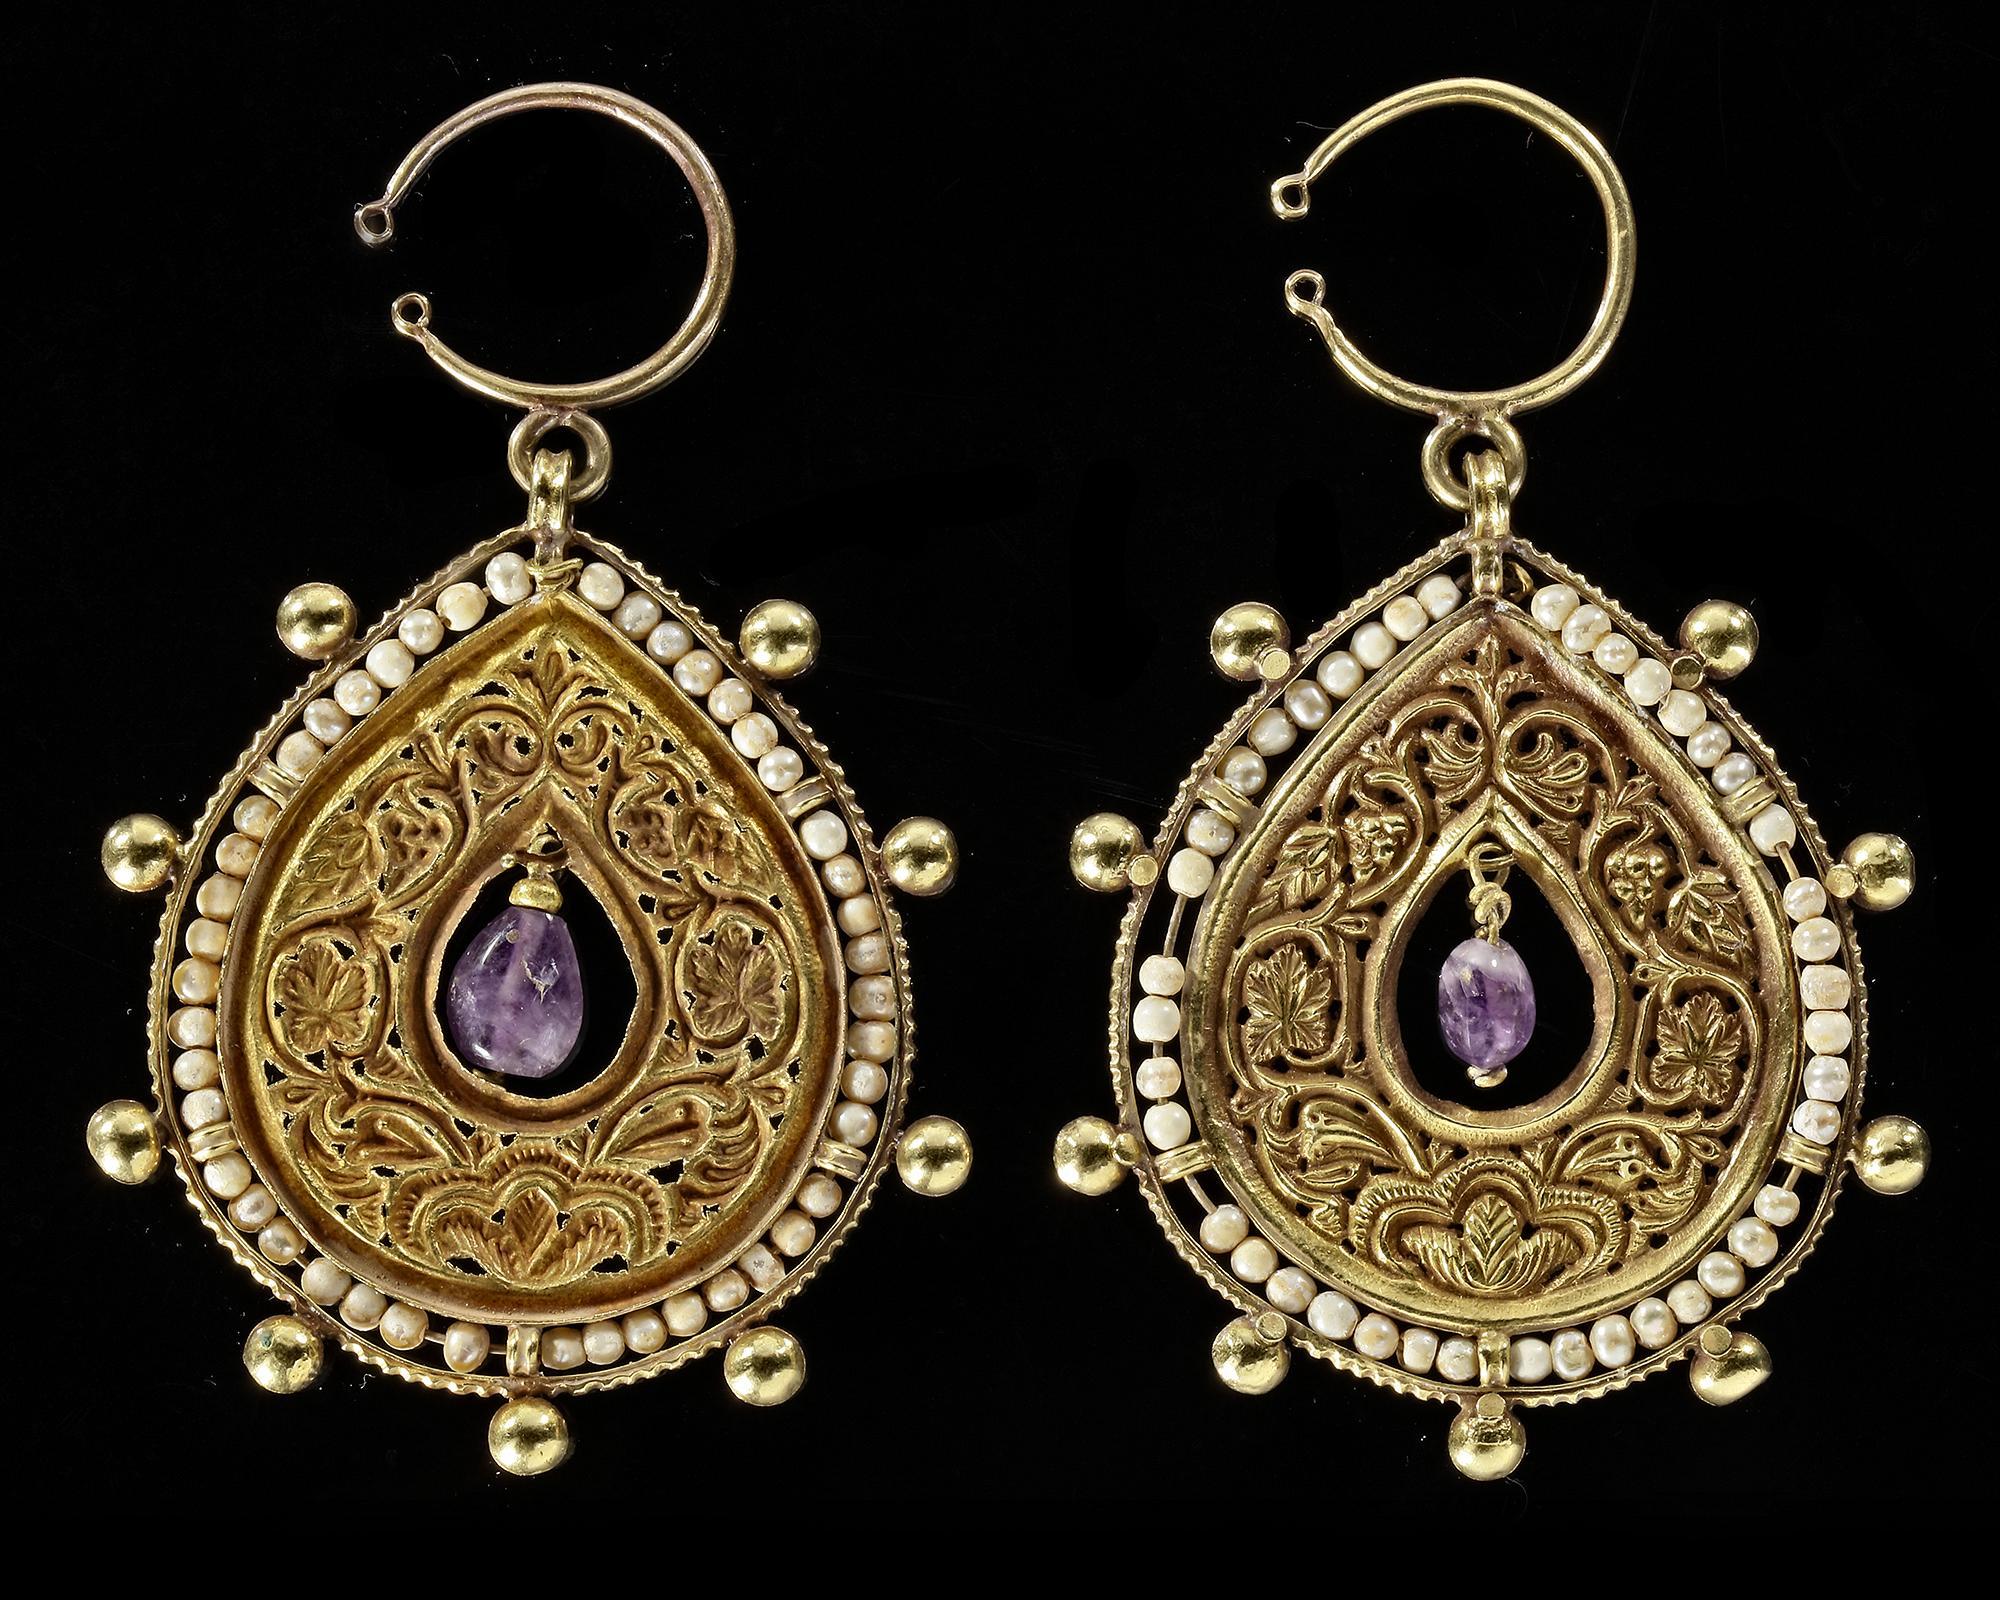 A PAIR OF BYZANTINE GOLD EARRINGS WITH PEARLS AND AMETHYST, CIRCA 6TH-7TH CENTURY A.D.